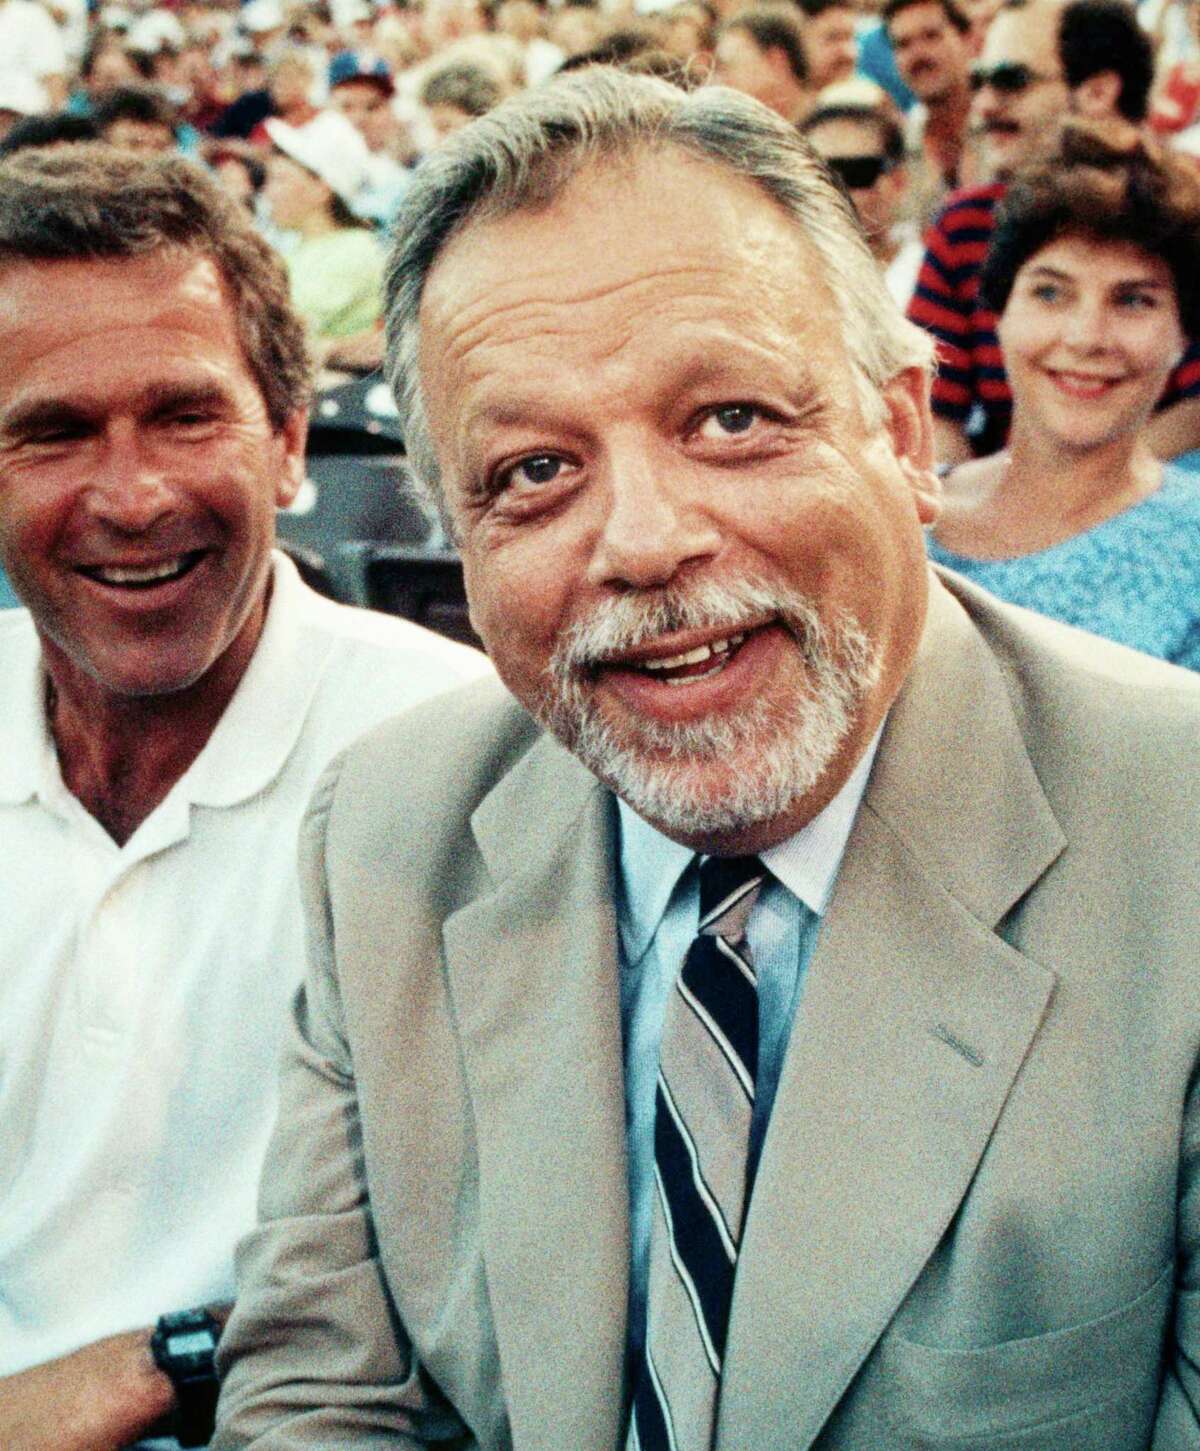 Baseball Commissioner A. Bartlett Giamatti, shown here in an August 22, 1989 file photo with Texas Rangers owner George W. Bush behind him.